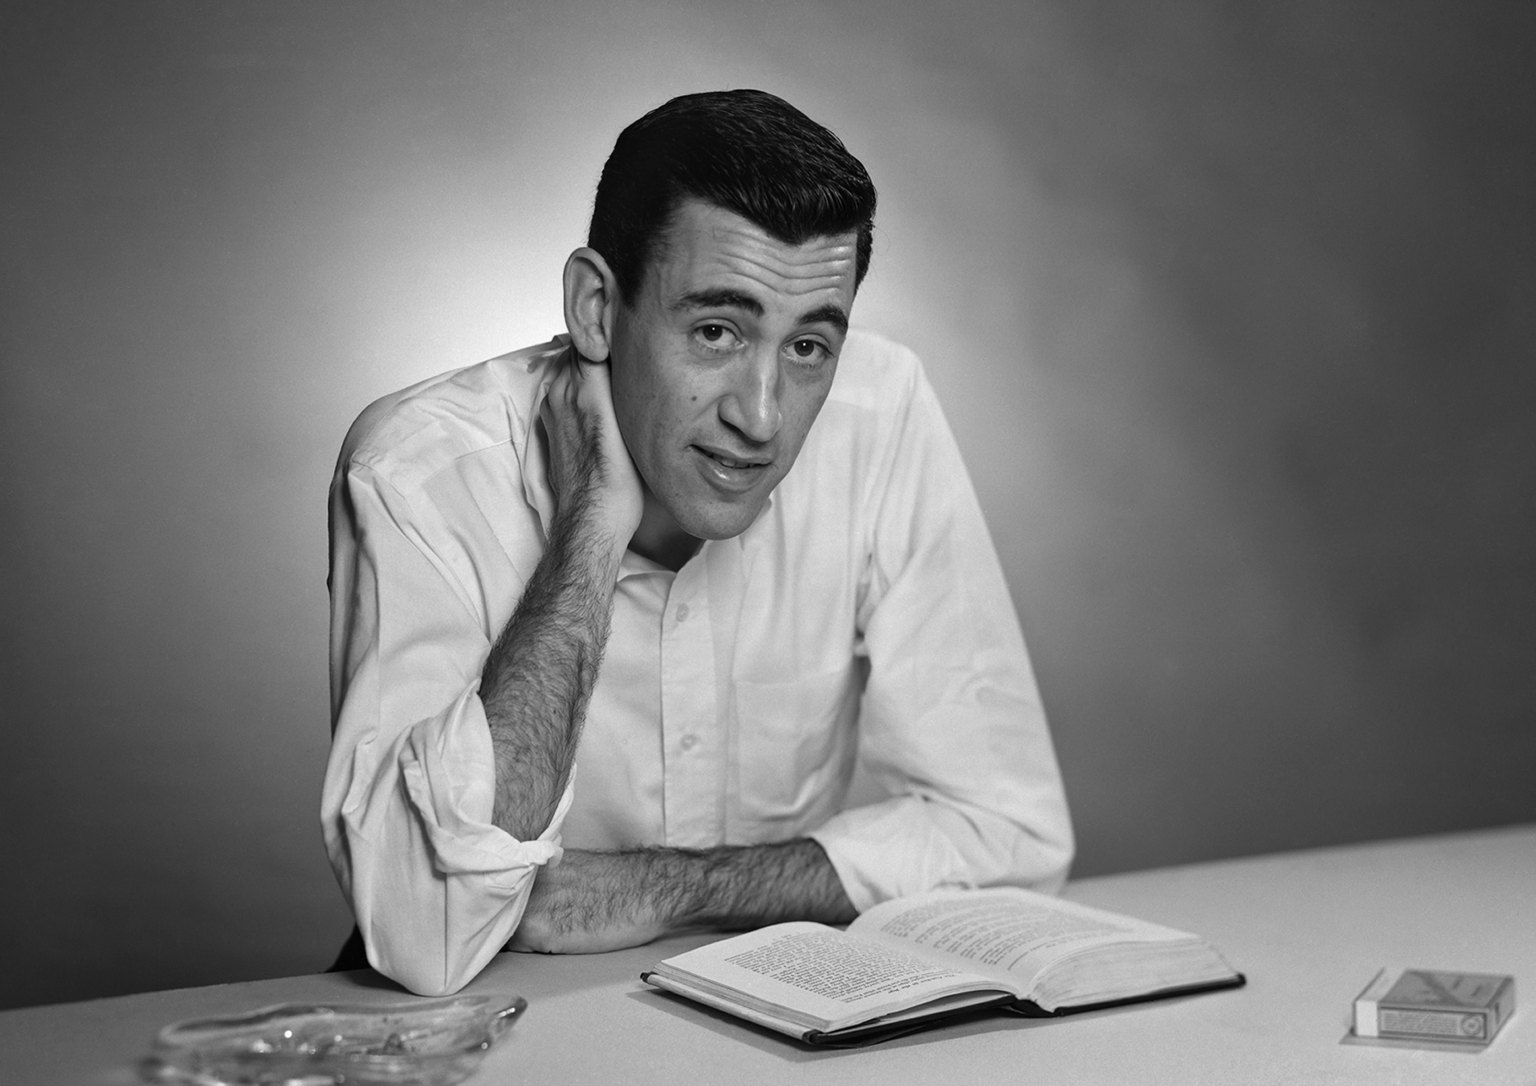 NEW YORK - NOVEMBER 20, 1952: Author JD Salinger poses for a portrait as he reads from his classic American novel "The Catcher in the Rye" on November 20, 1952 in the Brooklyn borough of New York City. Salinger died on January 27, 2010. (Photo by Antony Di Gesu/San Diego Historical Society/Hulton Archive Collection/Getty Images)